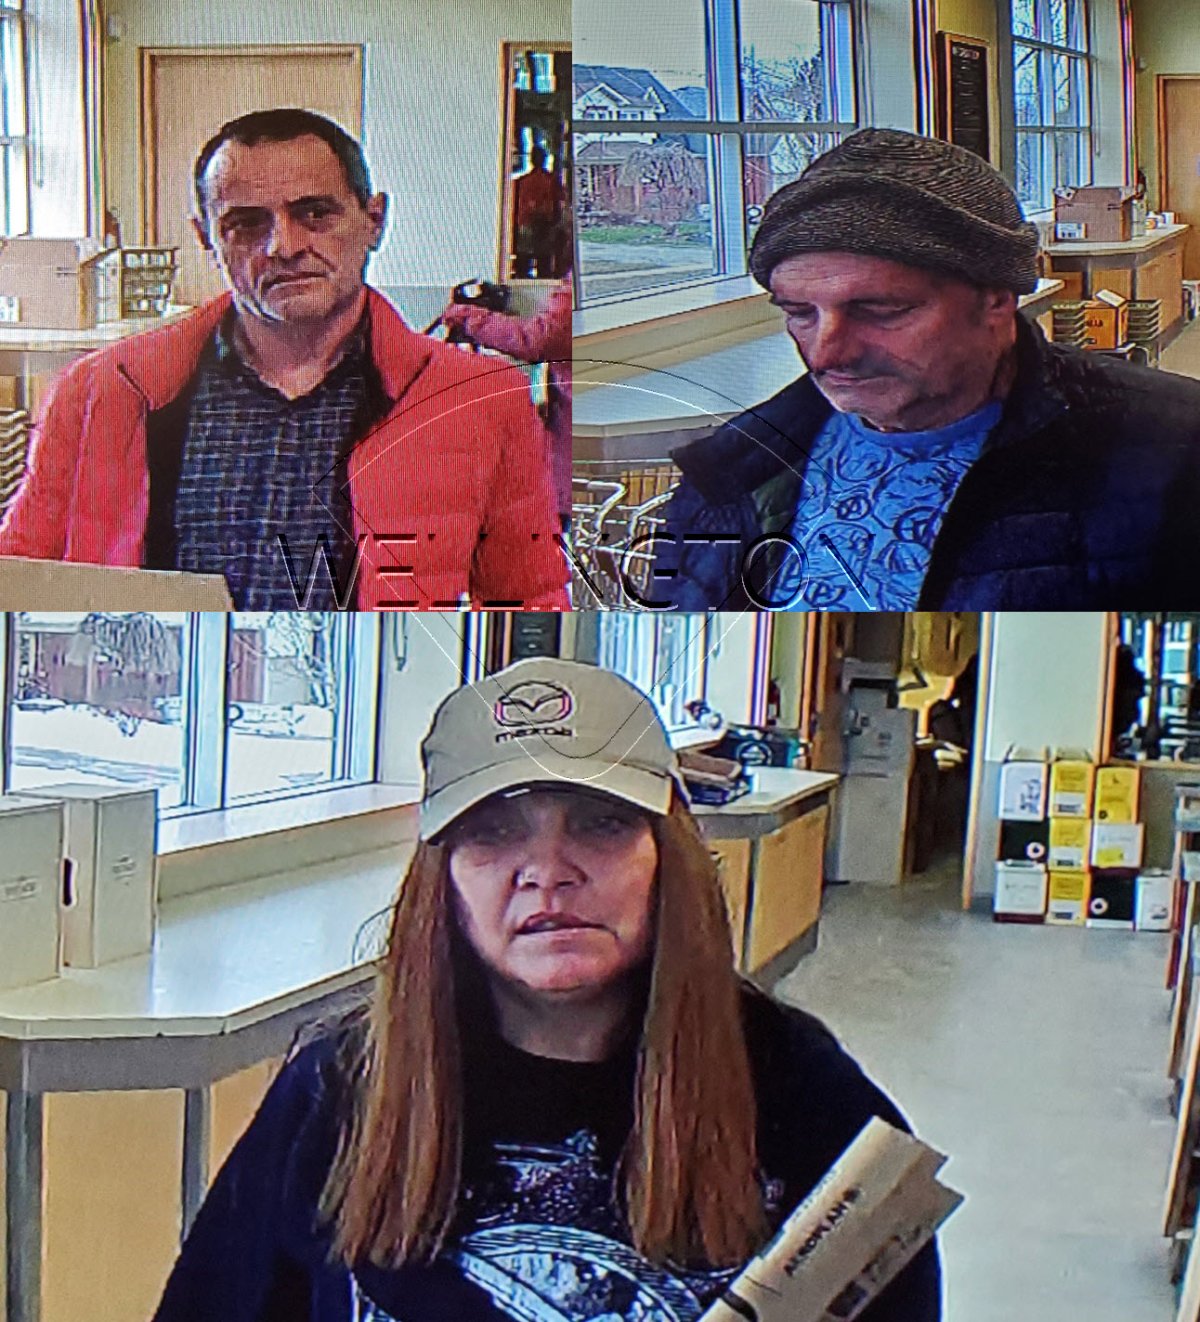 OPP are looking to identify these individuals, plus others, in connection with a shoplifting spree at a store in Centre Wellington, Ont.